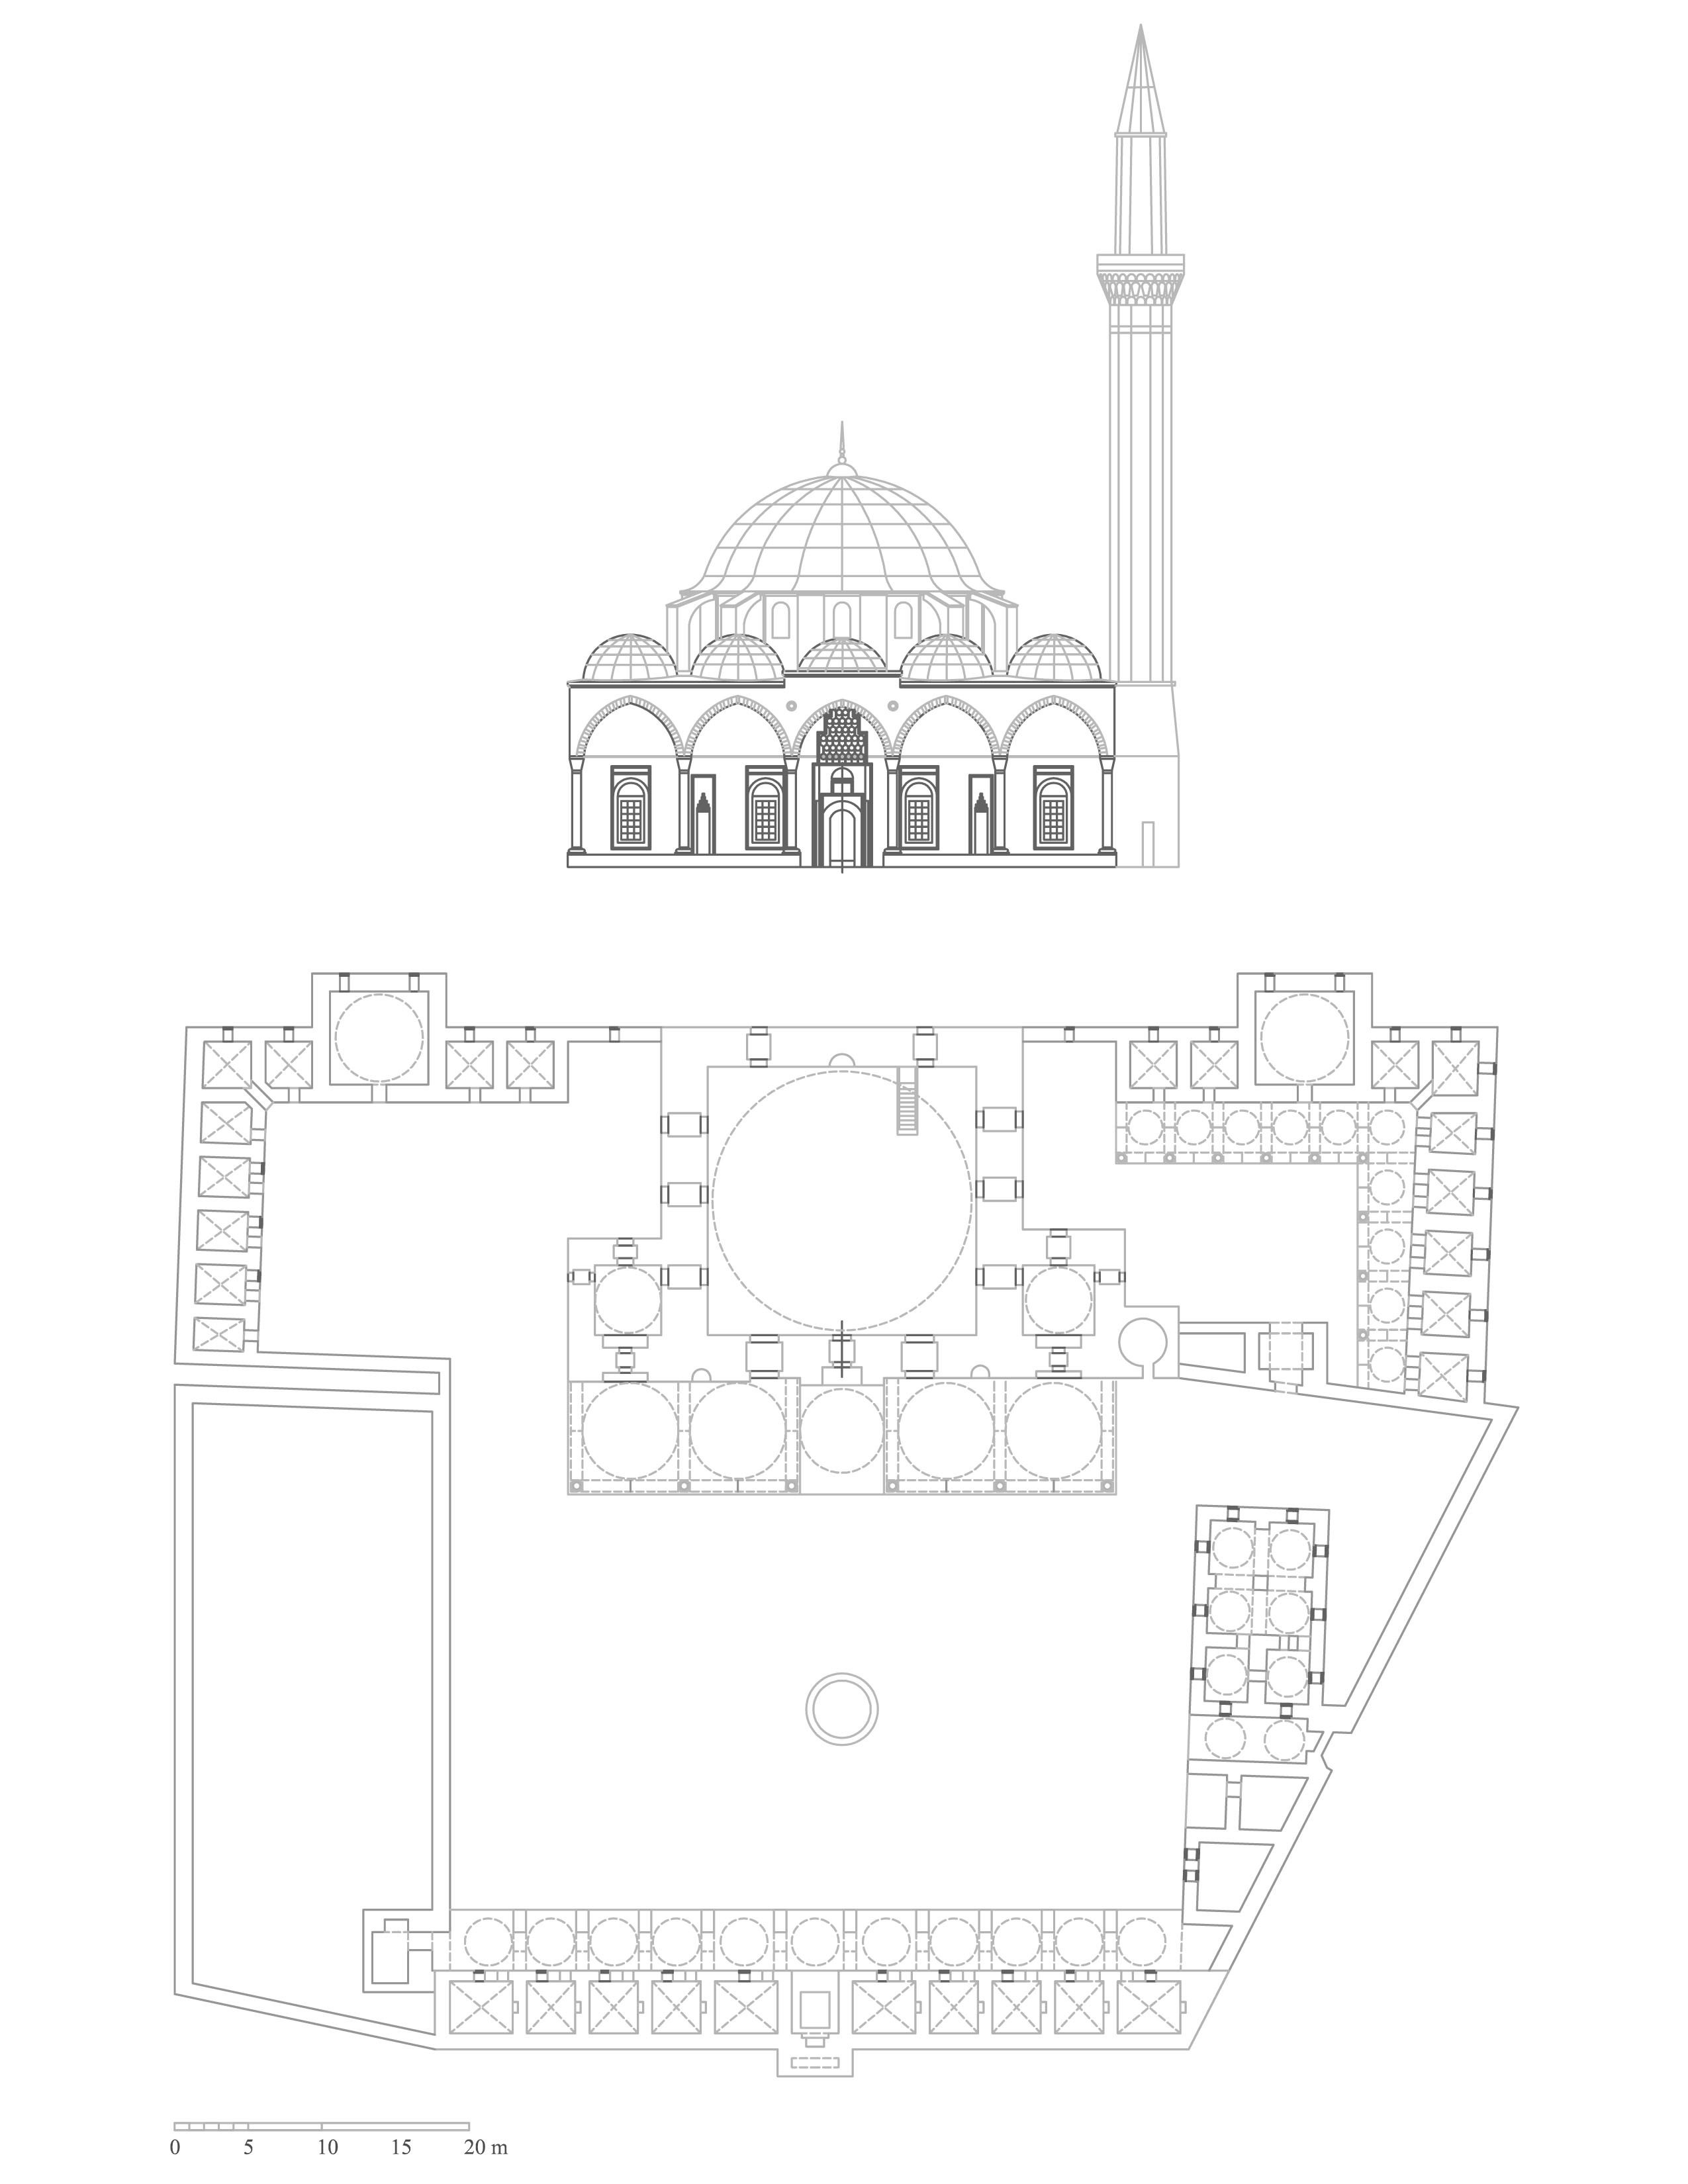 Reconstruction plan of the complex and mosque elevation